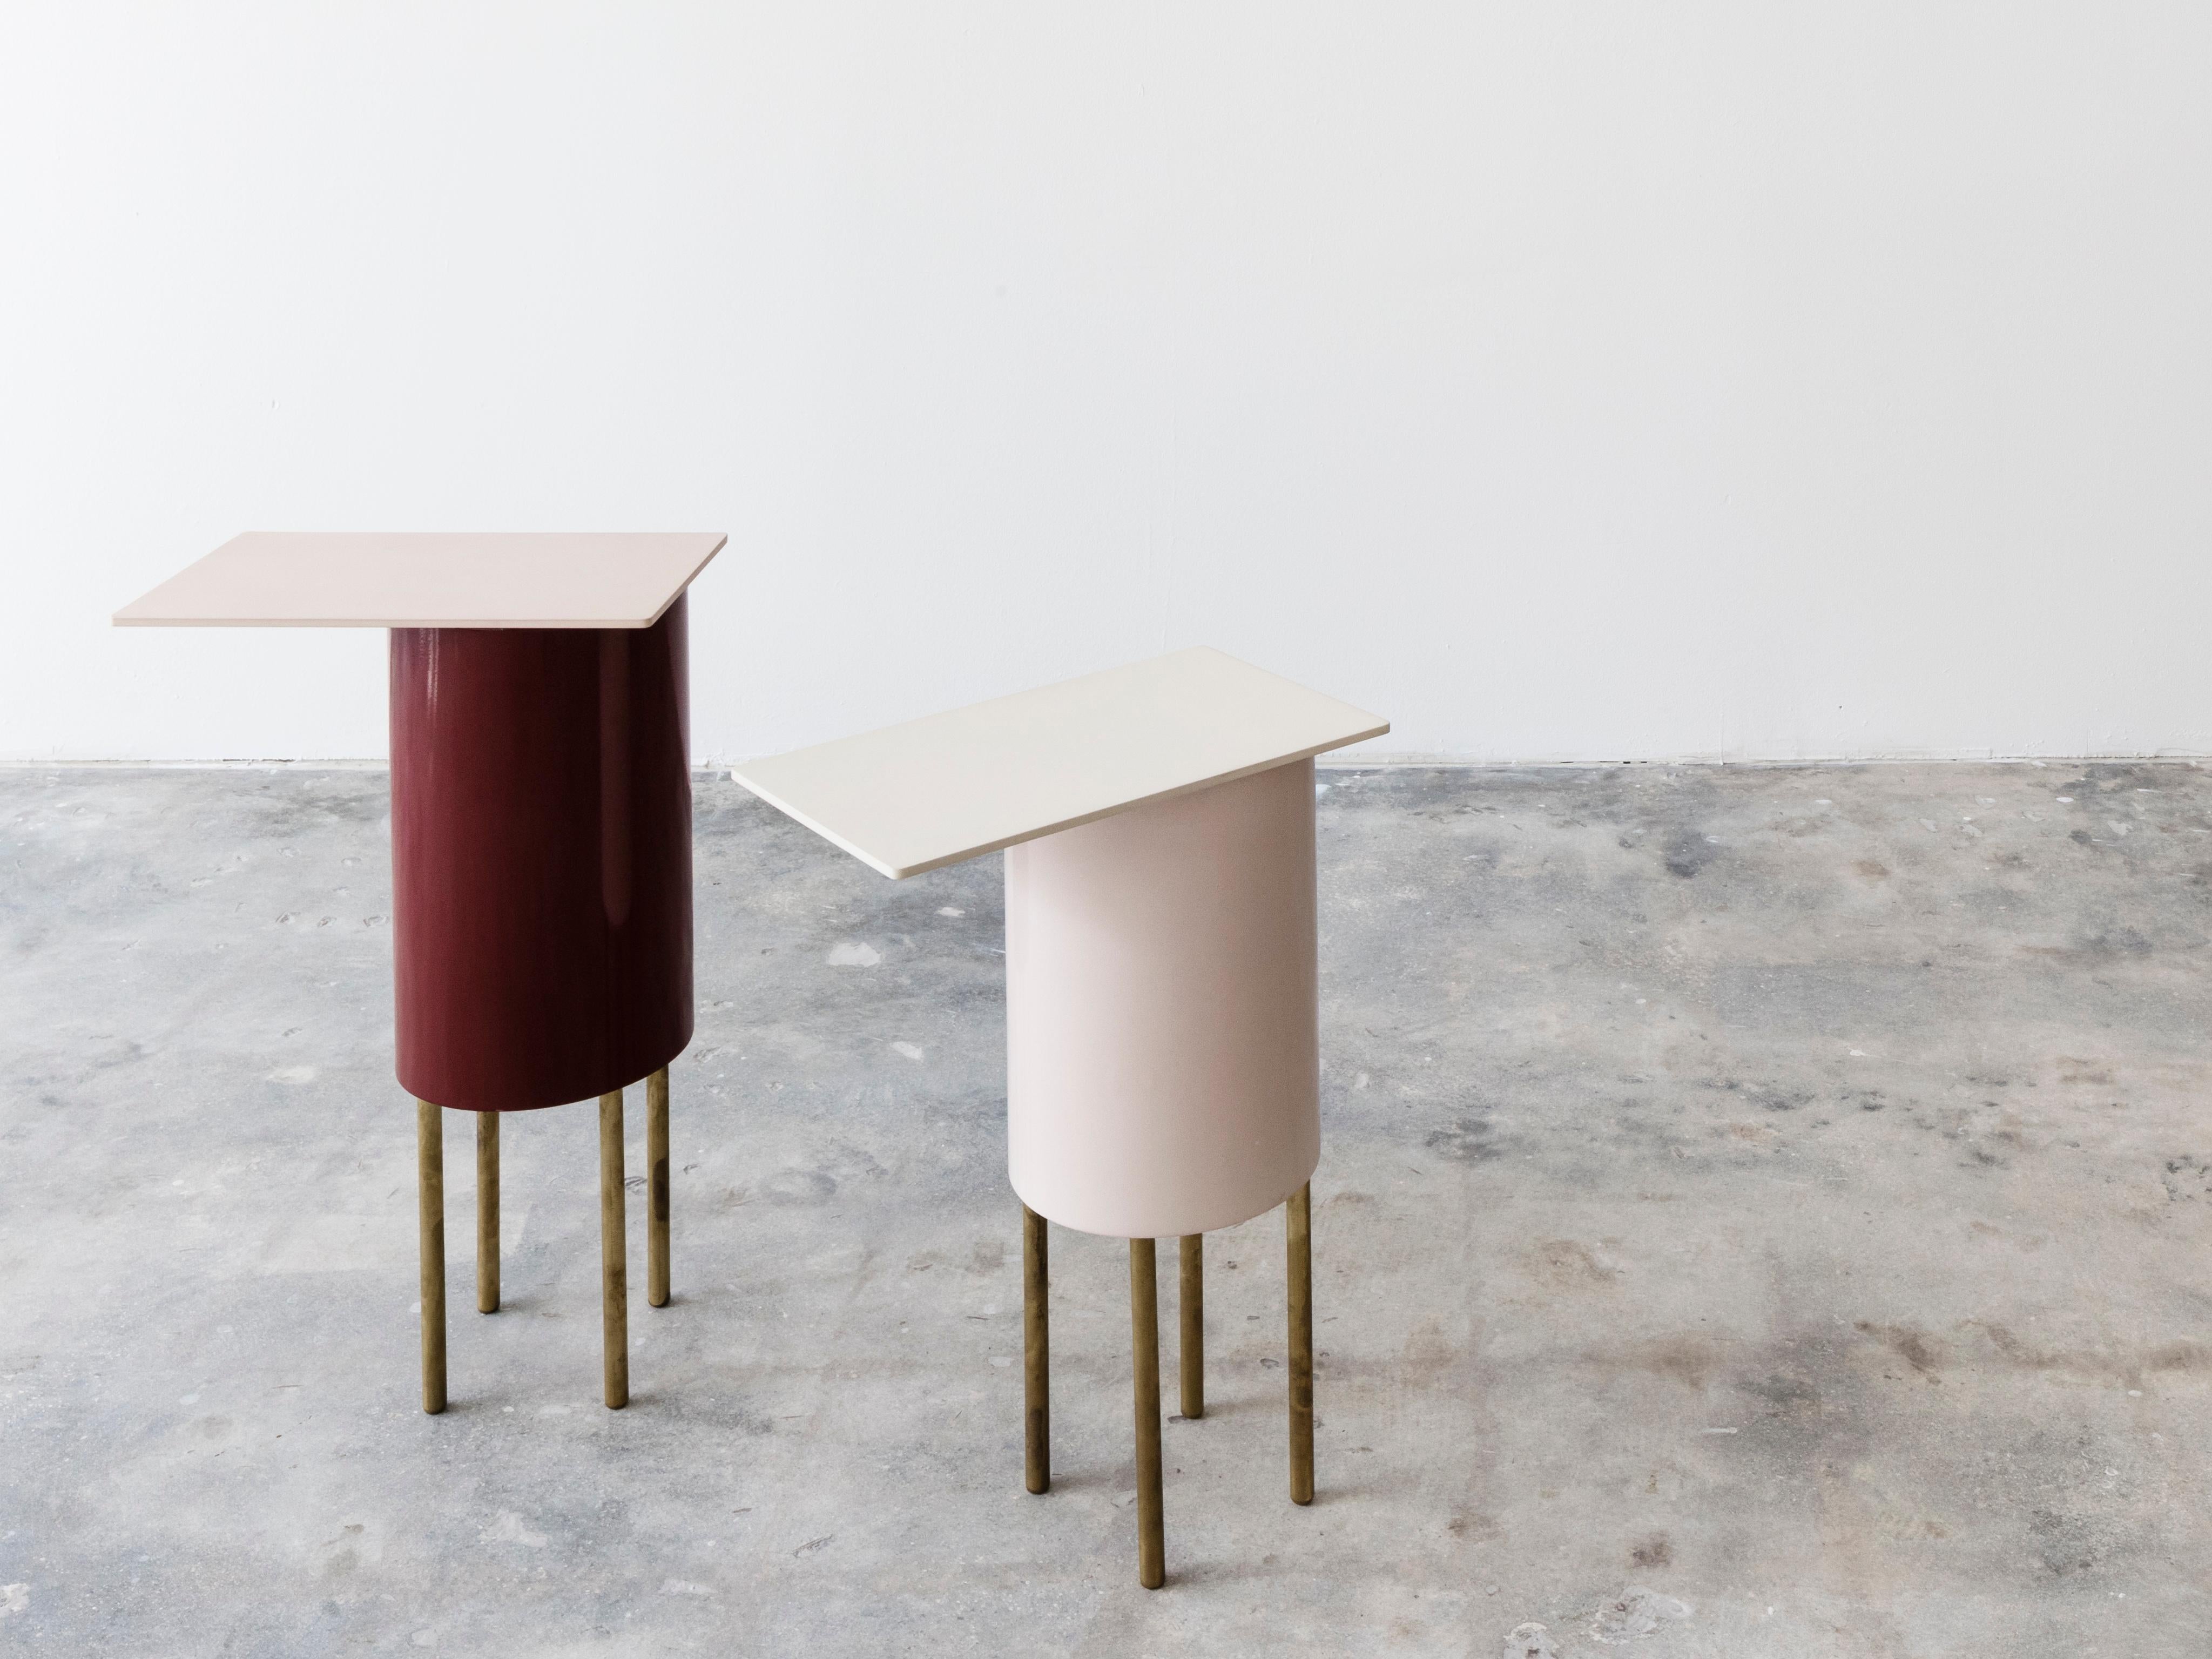 The nested bird like side tables are playful in both color and structure. The tables are made of powder coated aluminum in bright colors.  These side tables feature thin brass legs.

Jonathan Gonzalez (b. 1981) is a Miami based Architect and